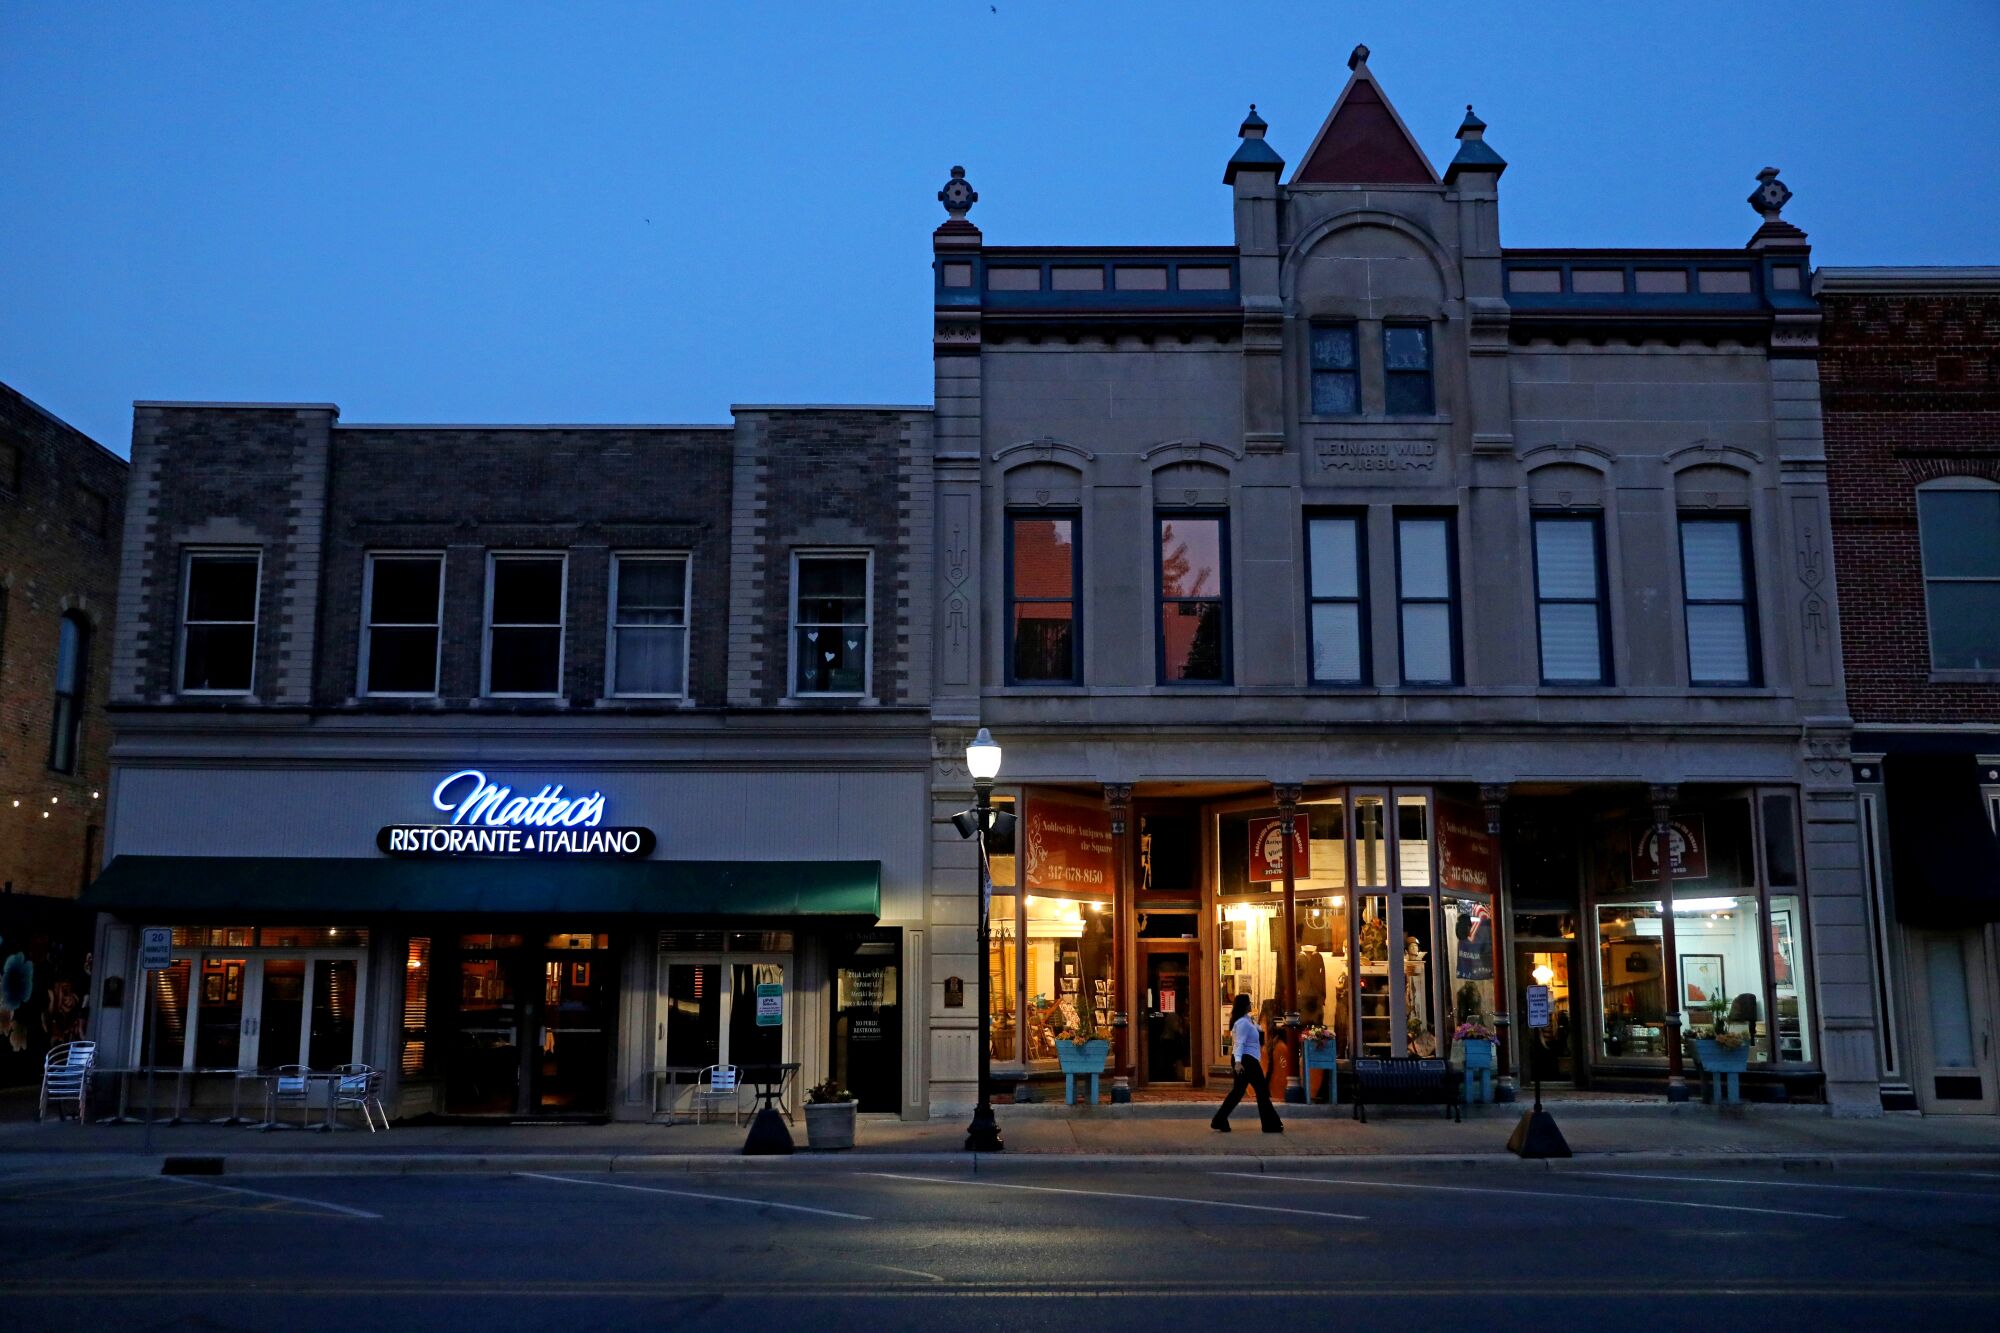 Dusk settles in along N. 9th St. in downtown Noblesville, Ind.